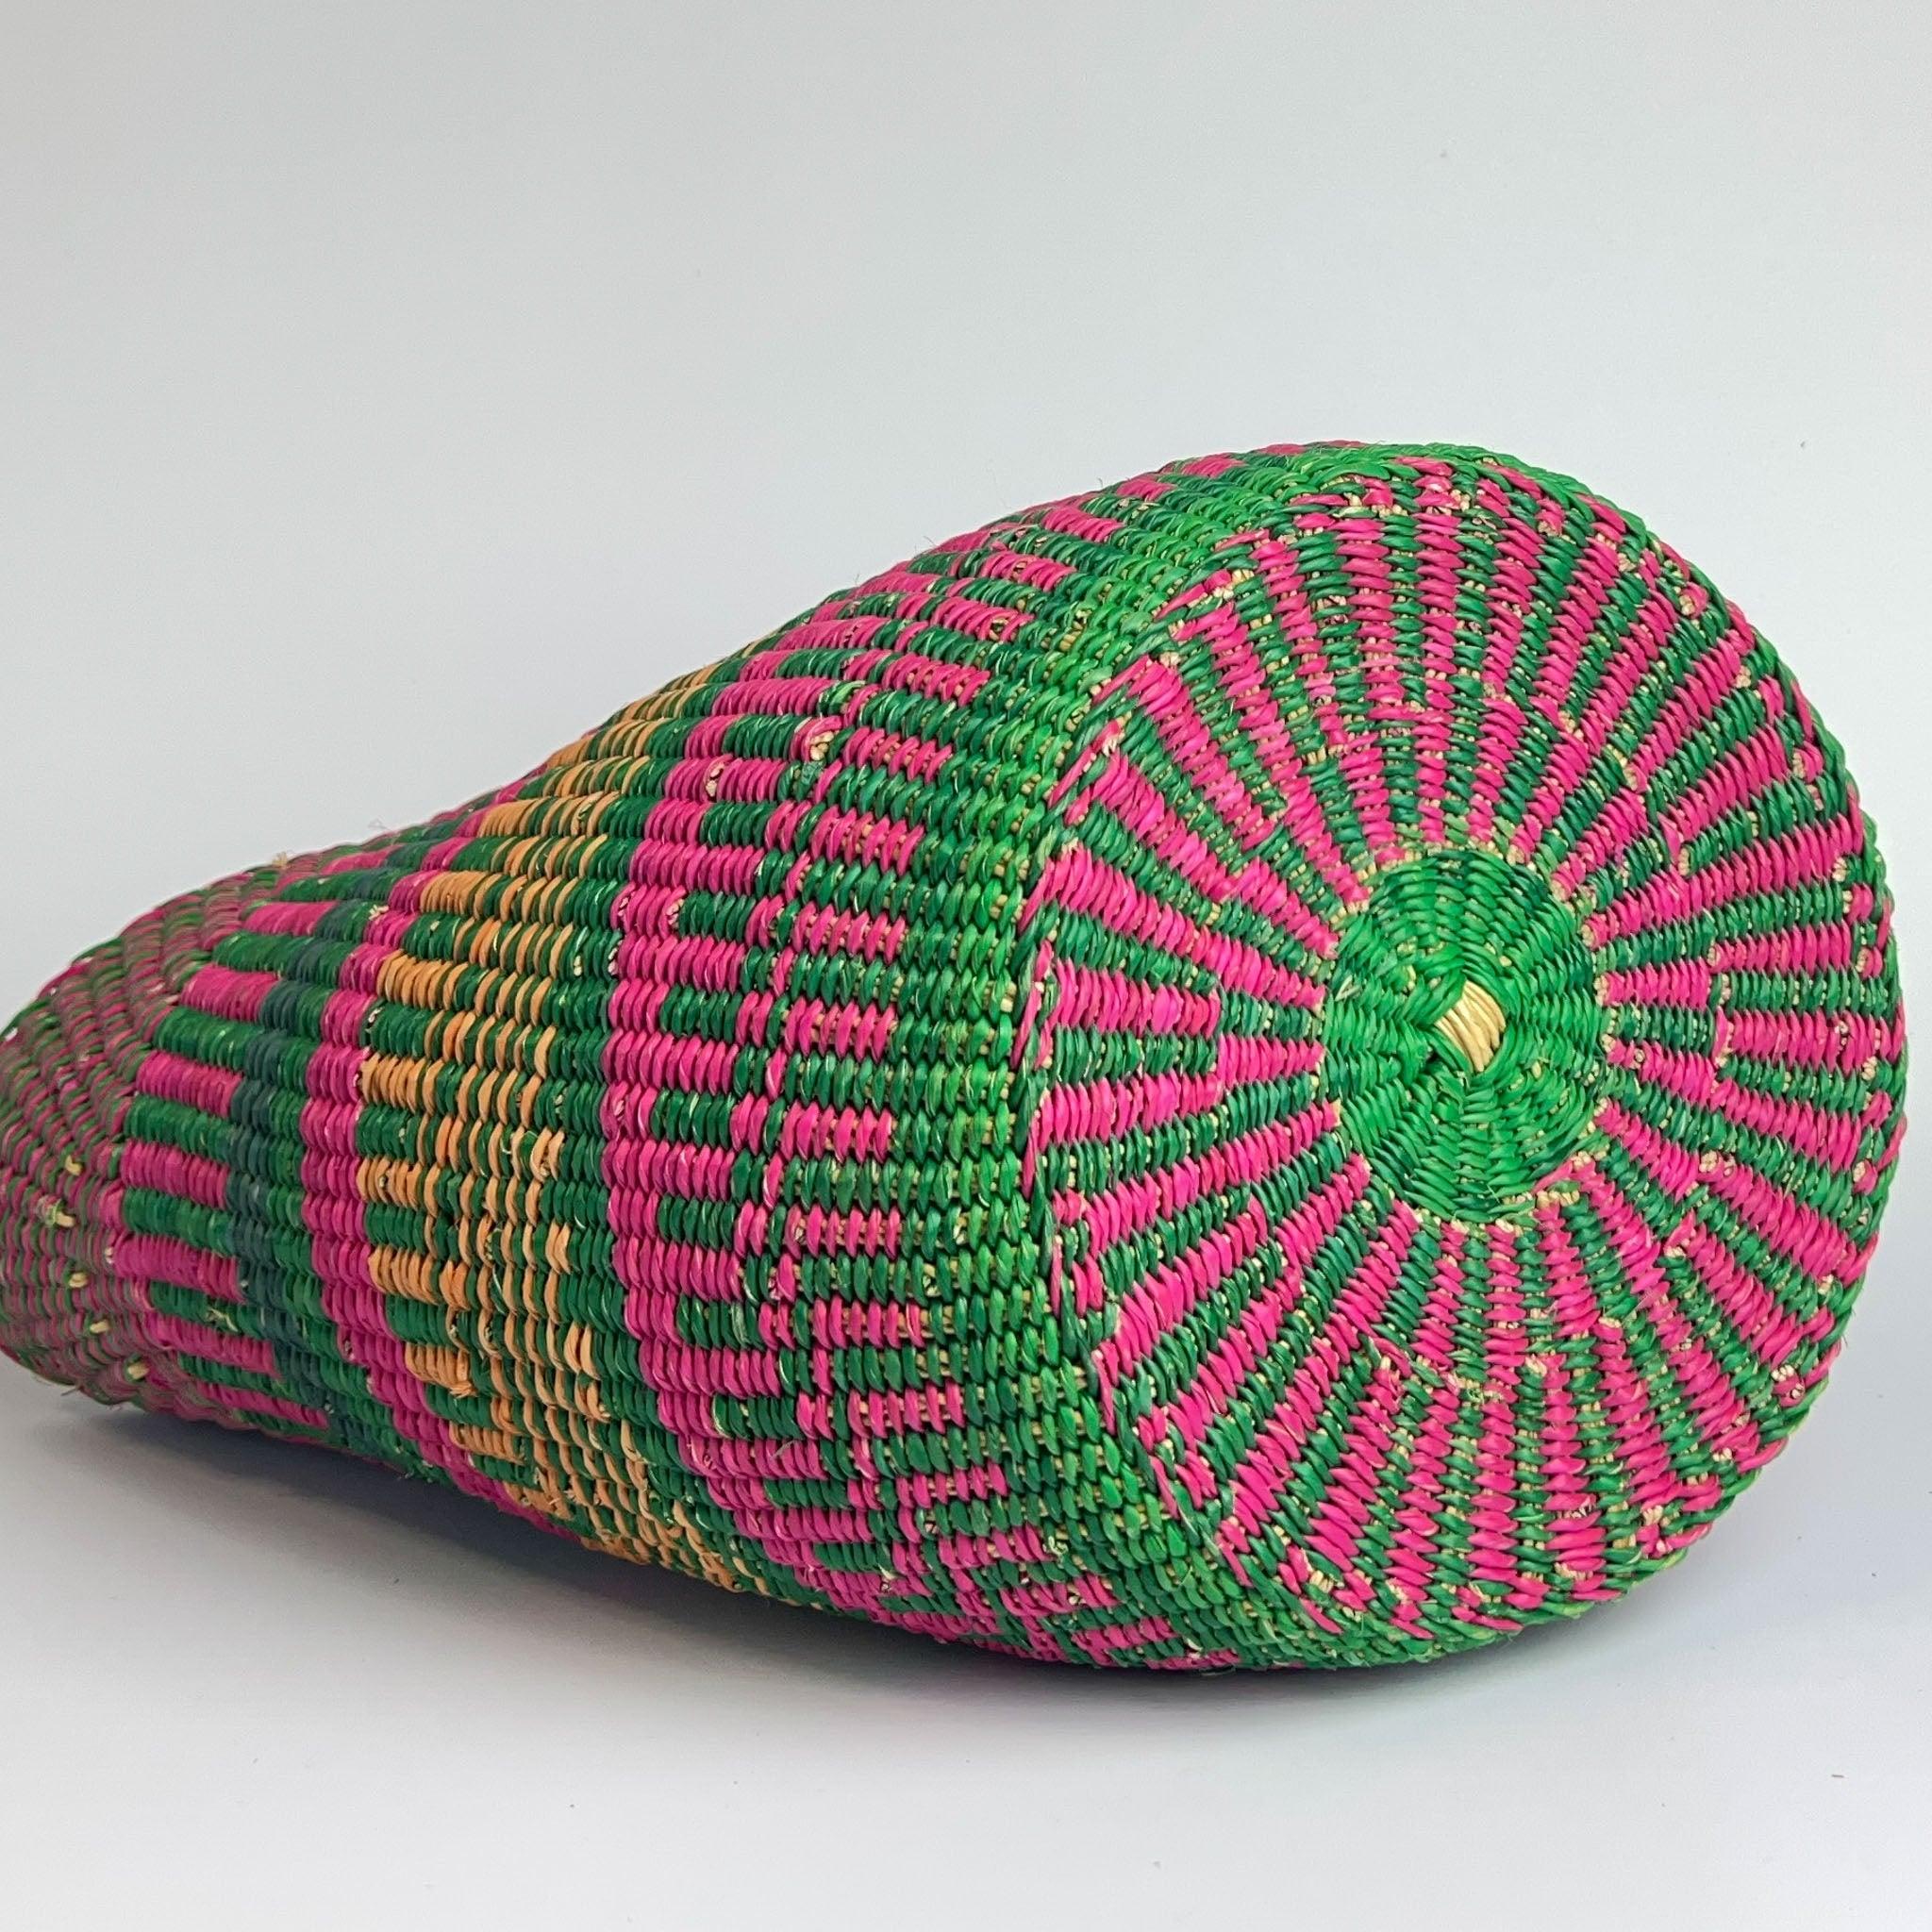 Traditional African shopping basket on it's side to show the intricate design and green  and pink colours of the base.